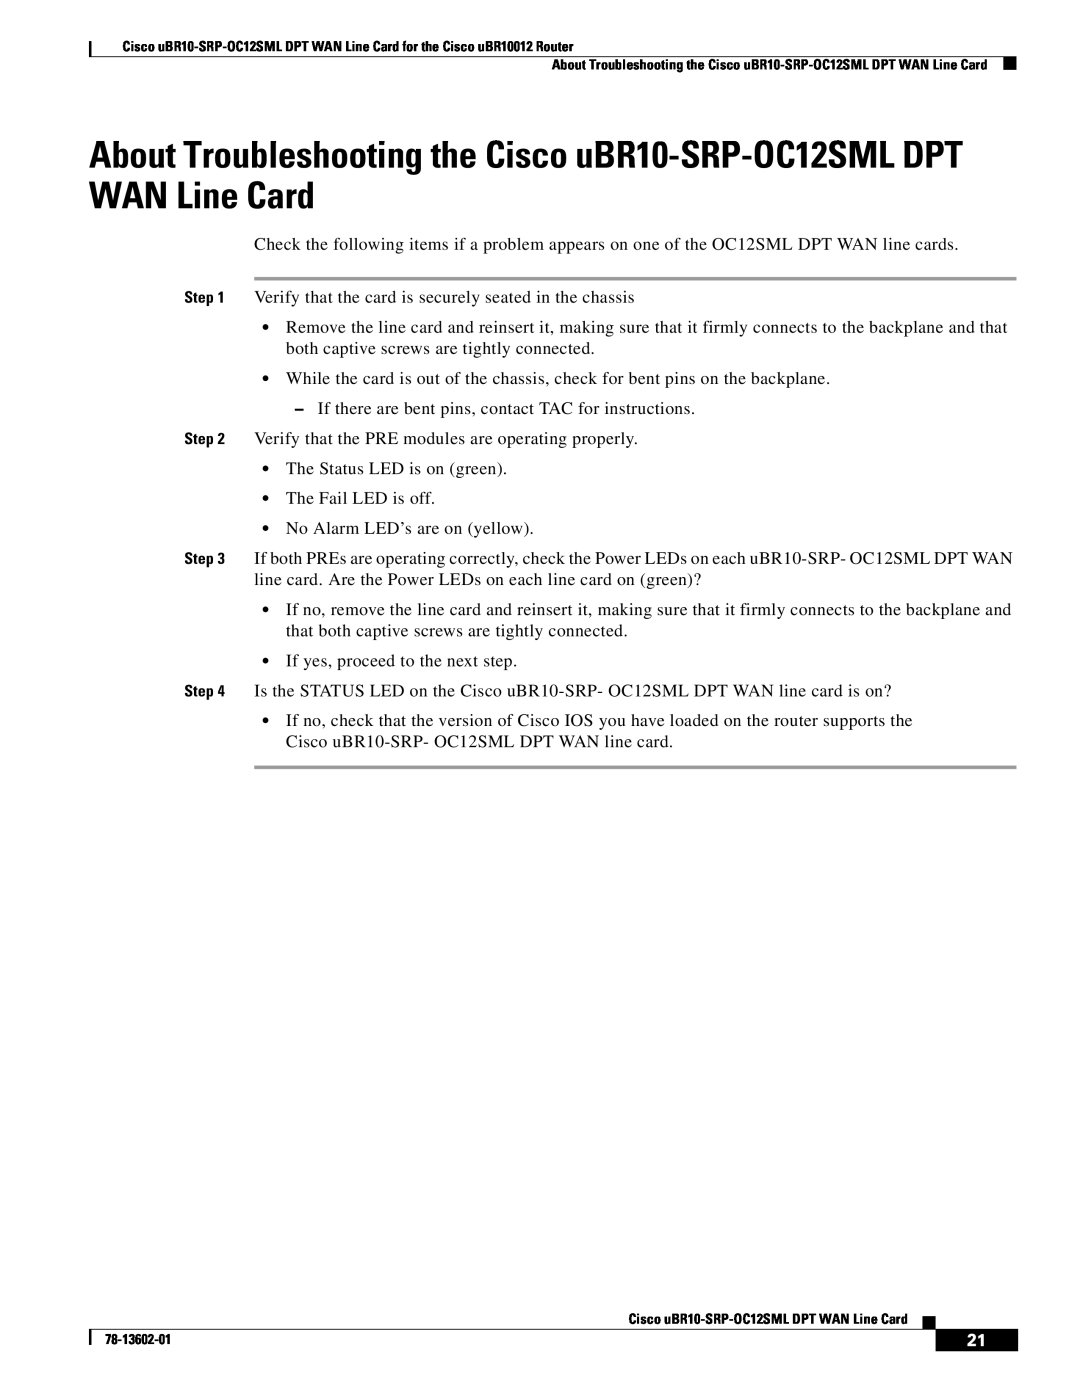 Cisco Systems technical specifications About Troubleshooting the Cisco uBR10-SRP-OC12SML DPT WAN Line Card 